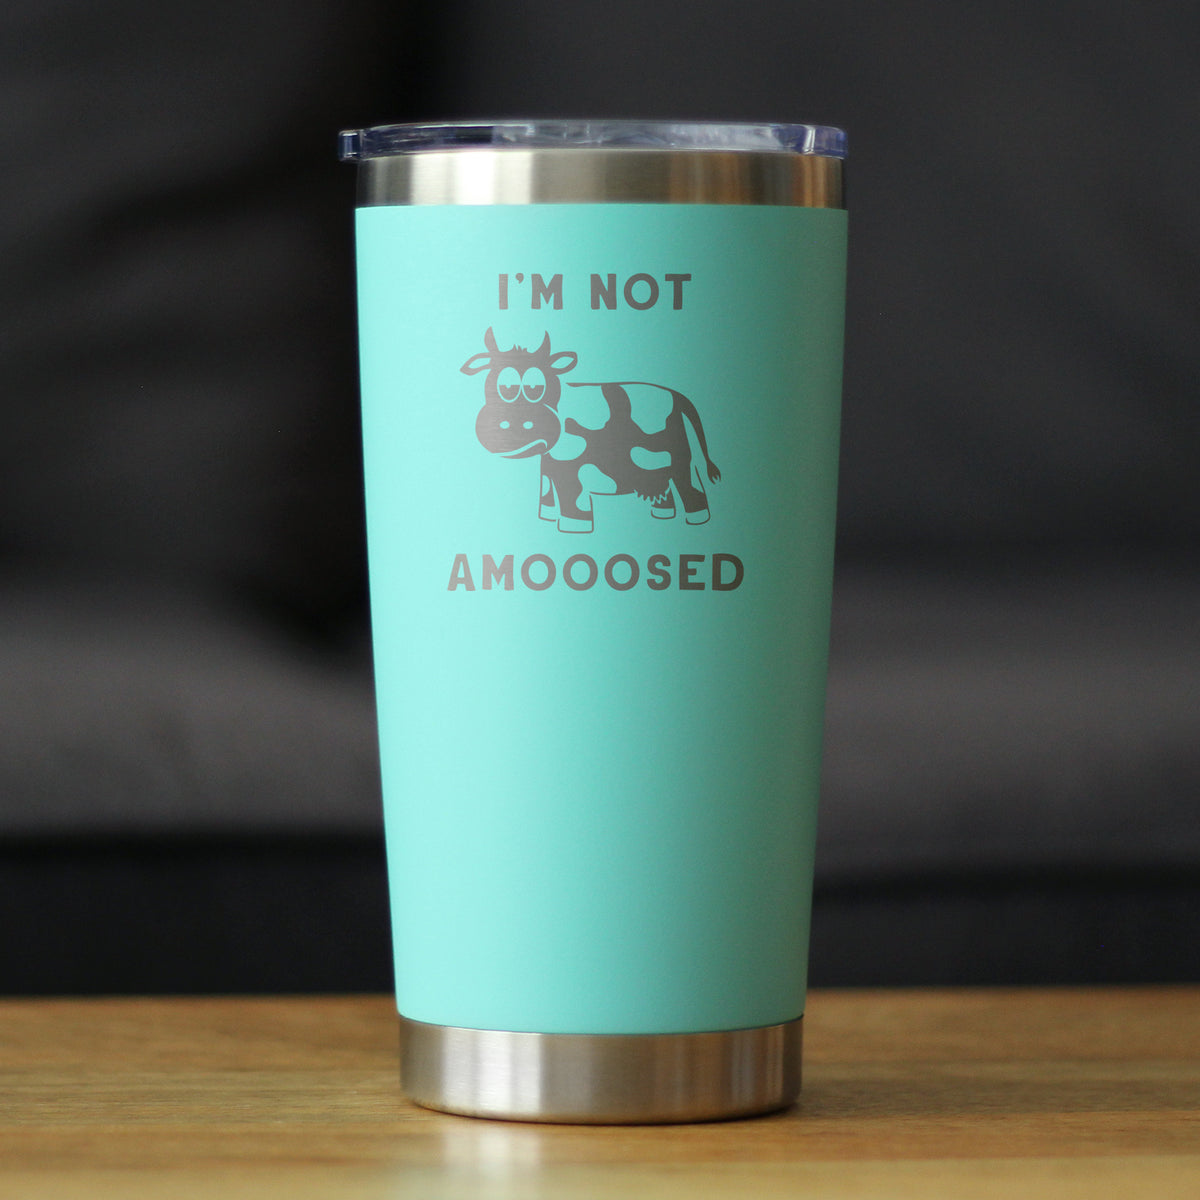 Not Amooosed - Insulated Coffee Tumbler Cup with Sliding Lid - Stainless Steel Insulated Mug - Funny Cow Themed Decor and Gifts